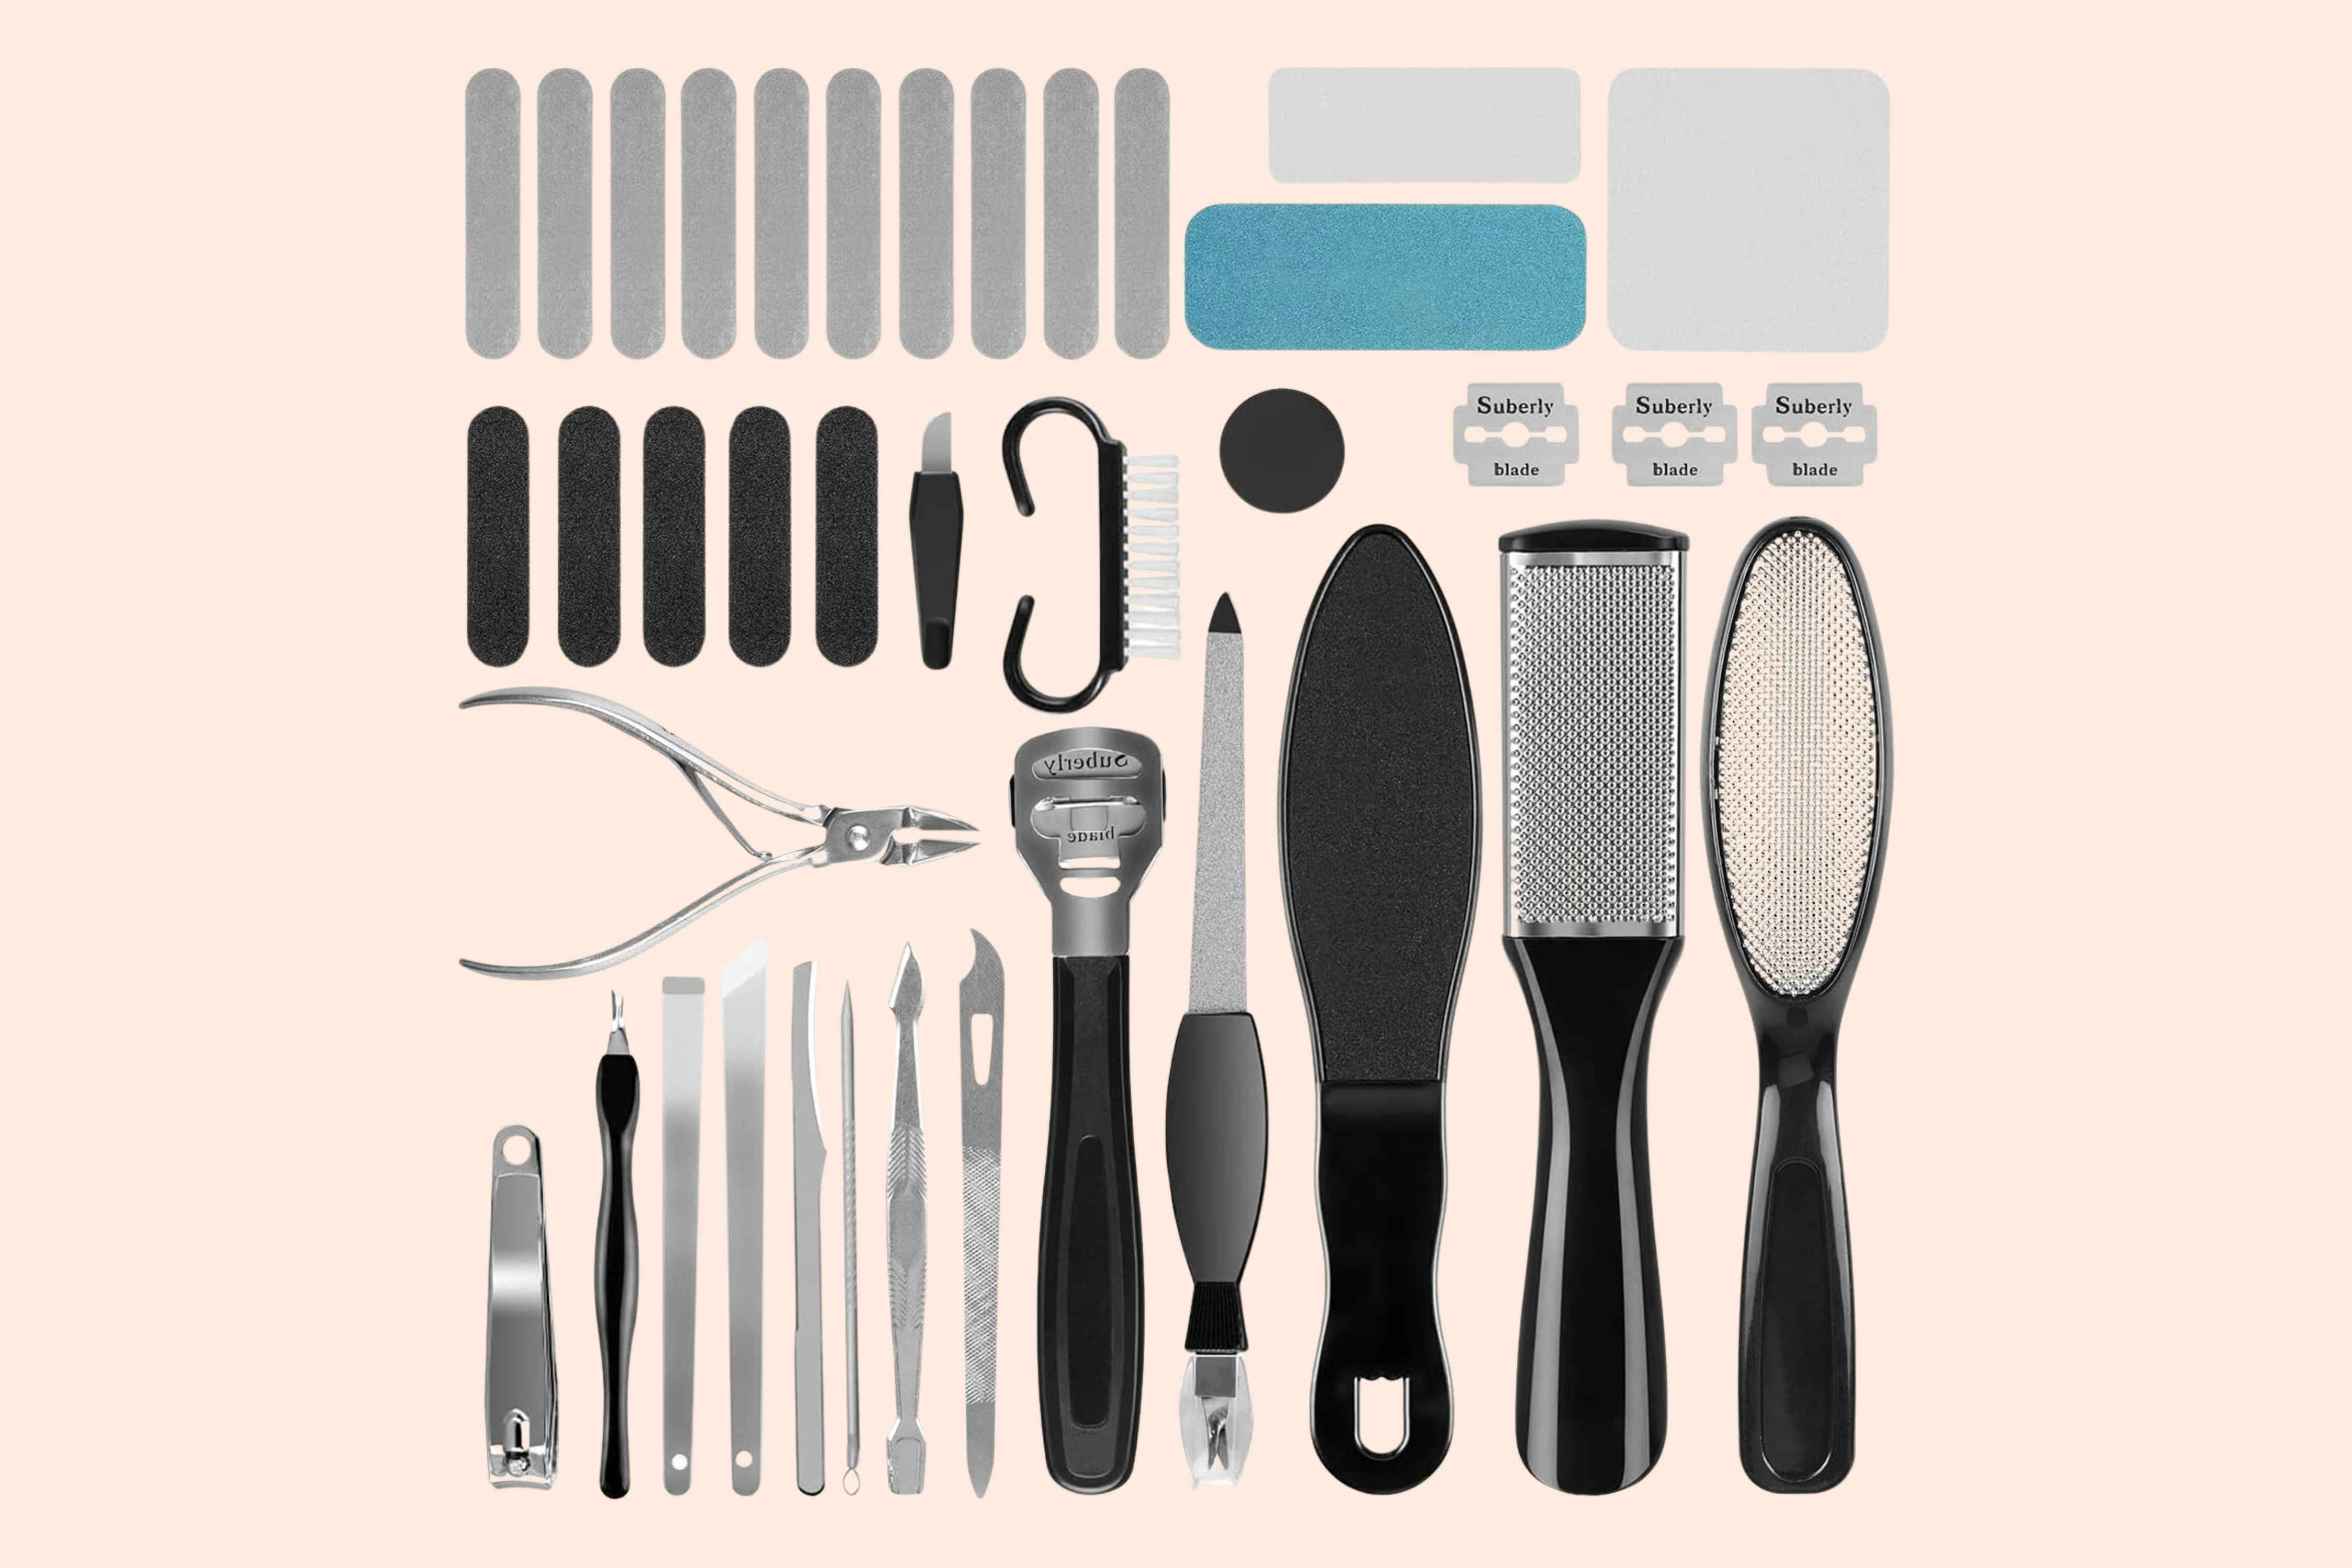 36-Piece Professional Pedicure Set, Only $9 on Amazon